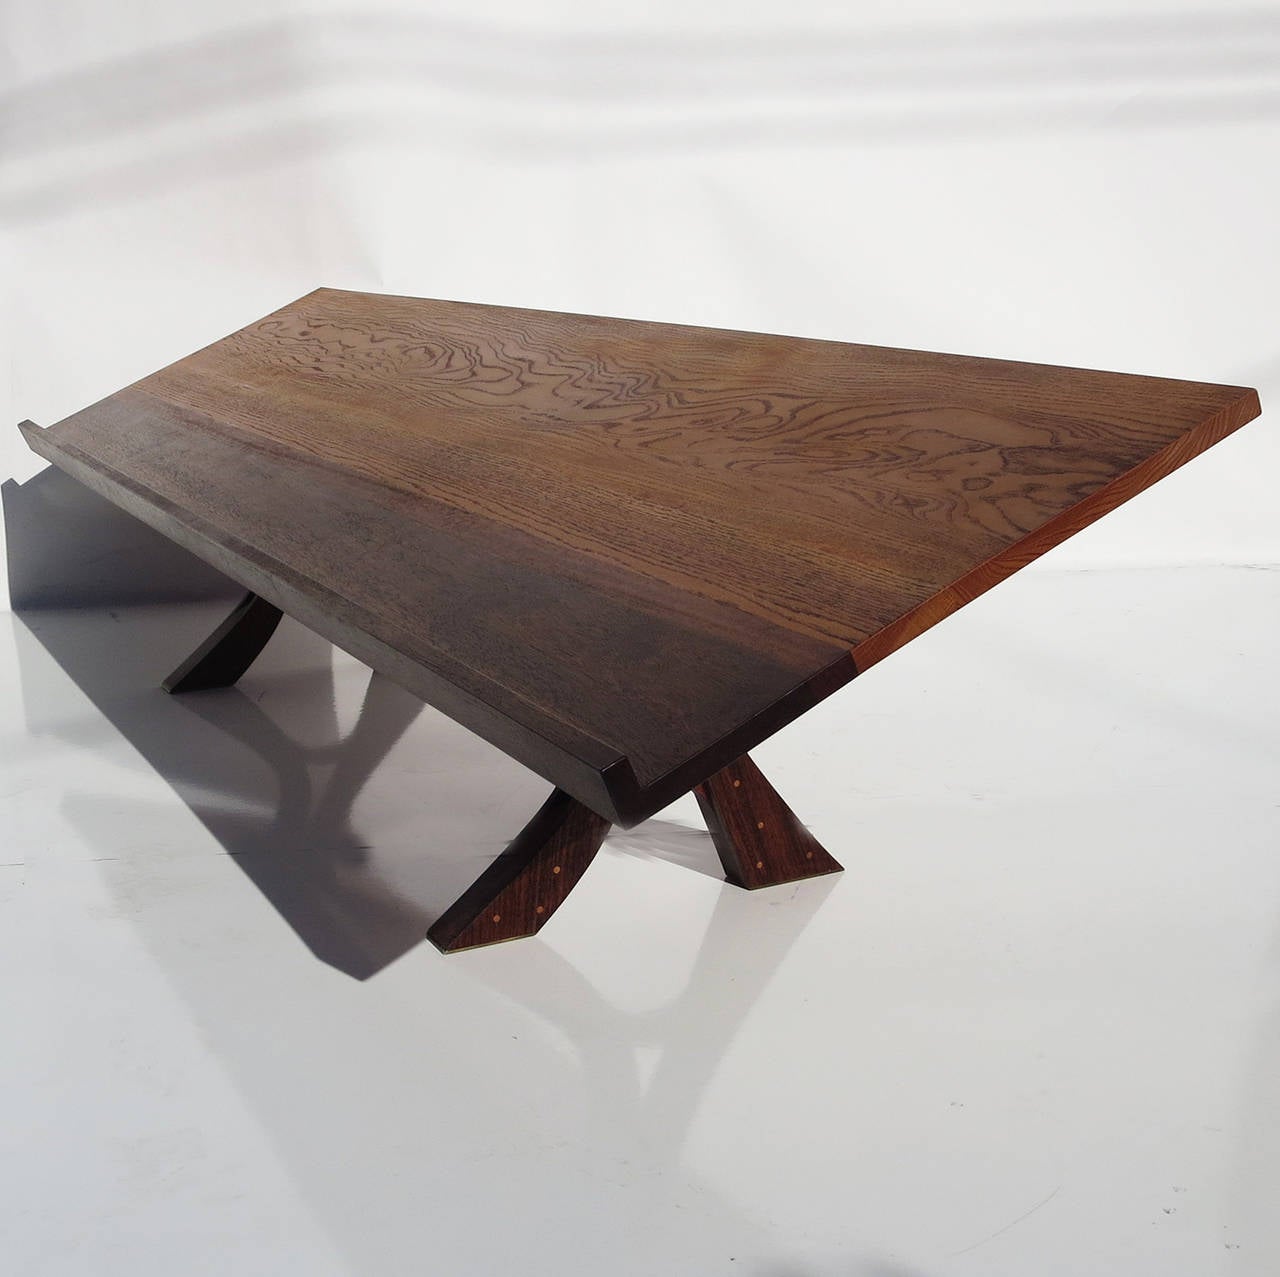 This wonderful studio table was created with the influence of George Nakashima in its' construction. The top is a combination of two woods, oak and rosewood. The legs are all rosewood, with pegged holes of a lighter wood. The finish is a satin